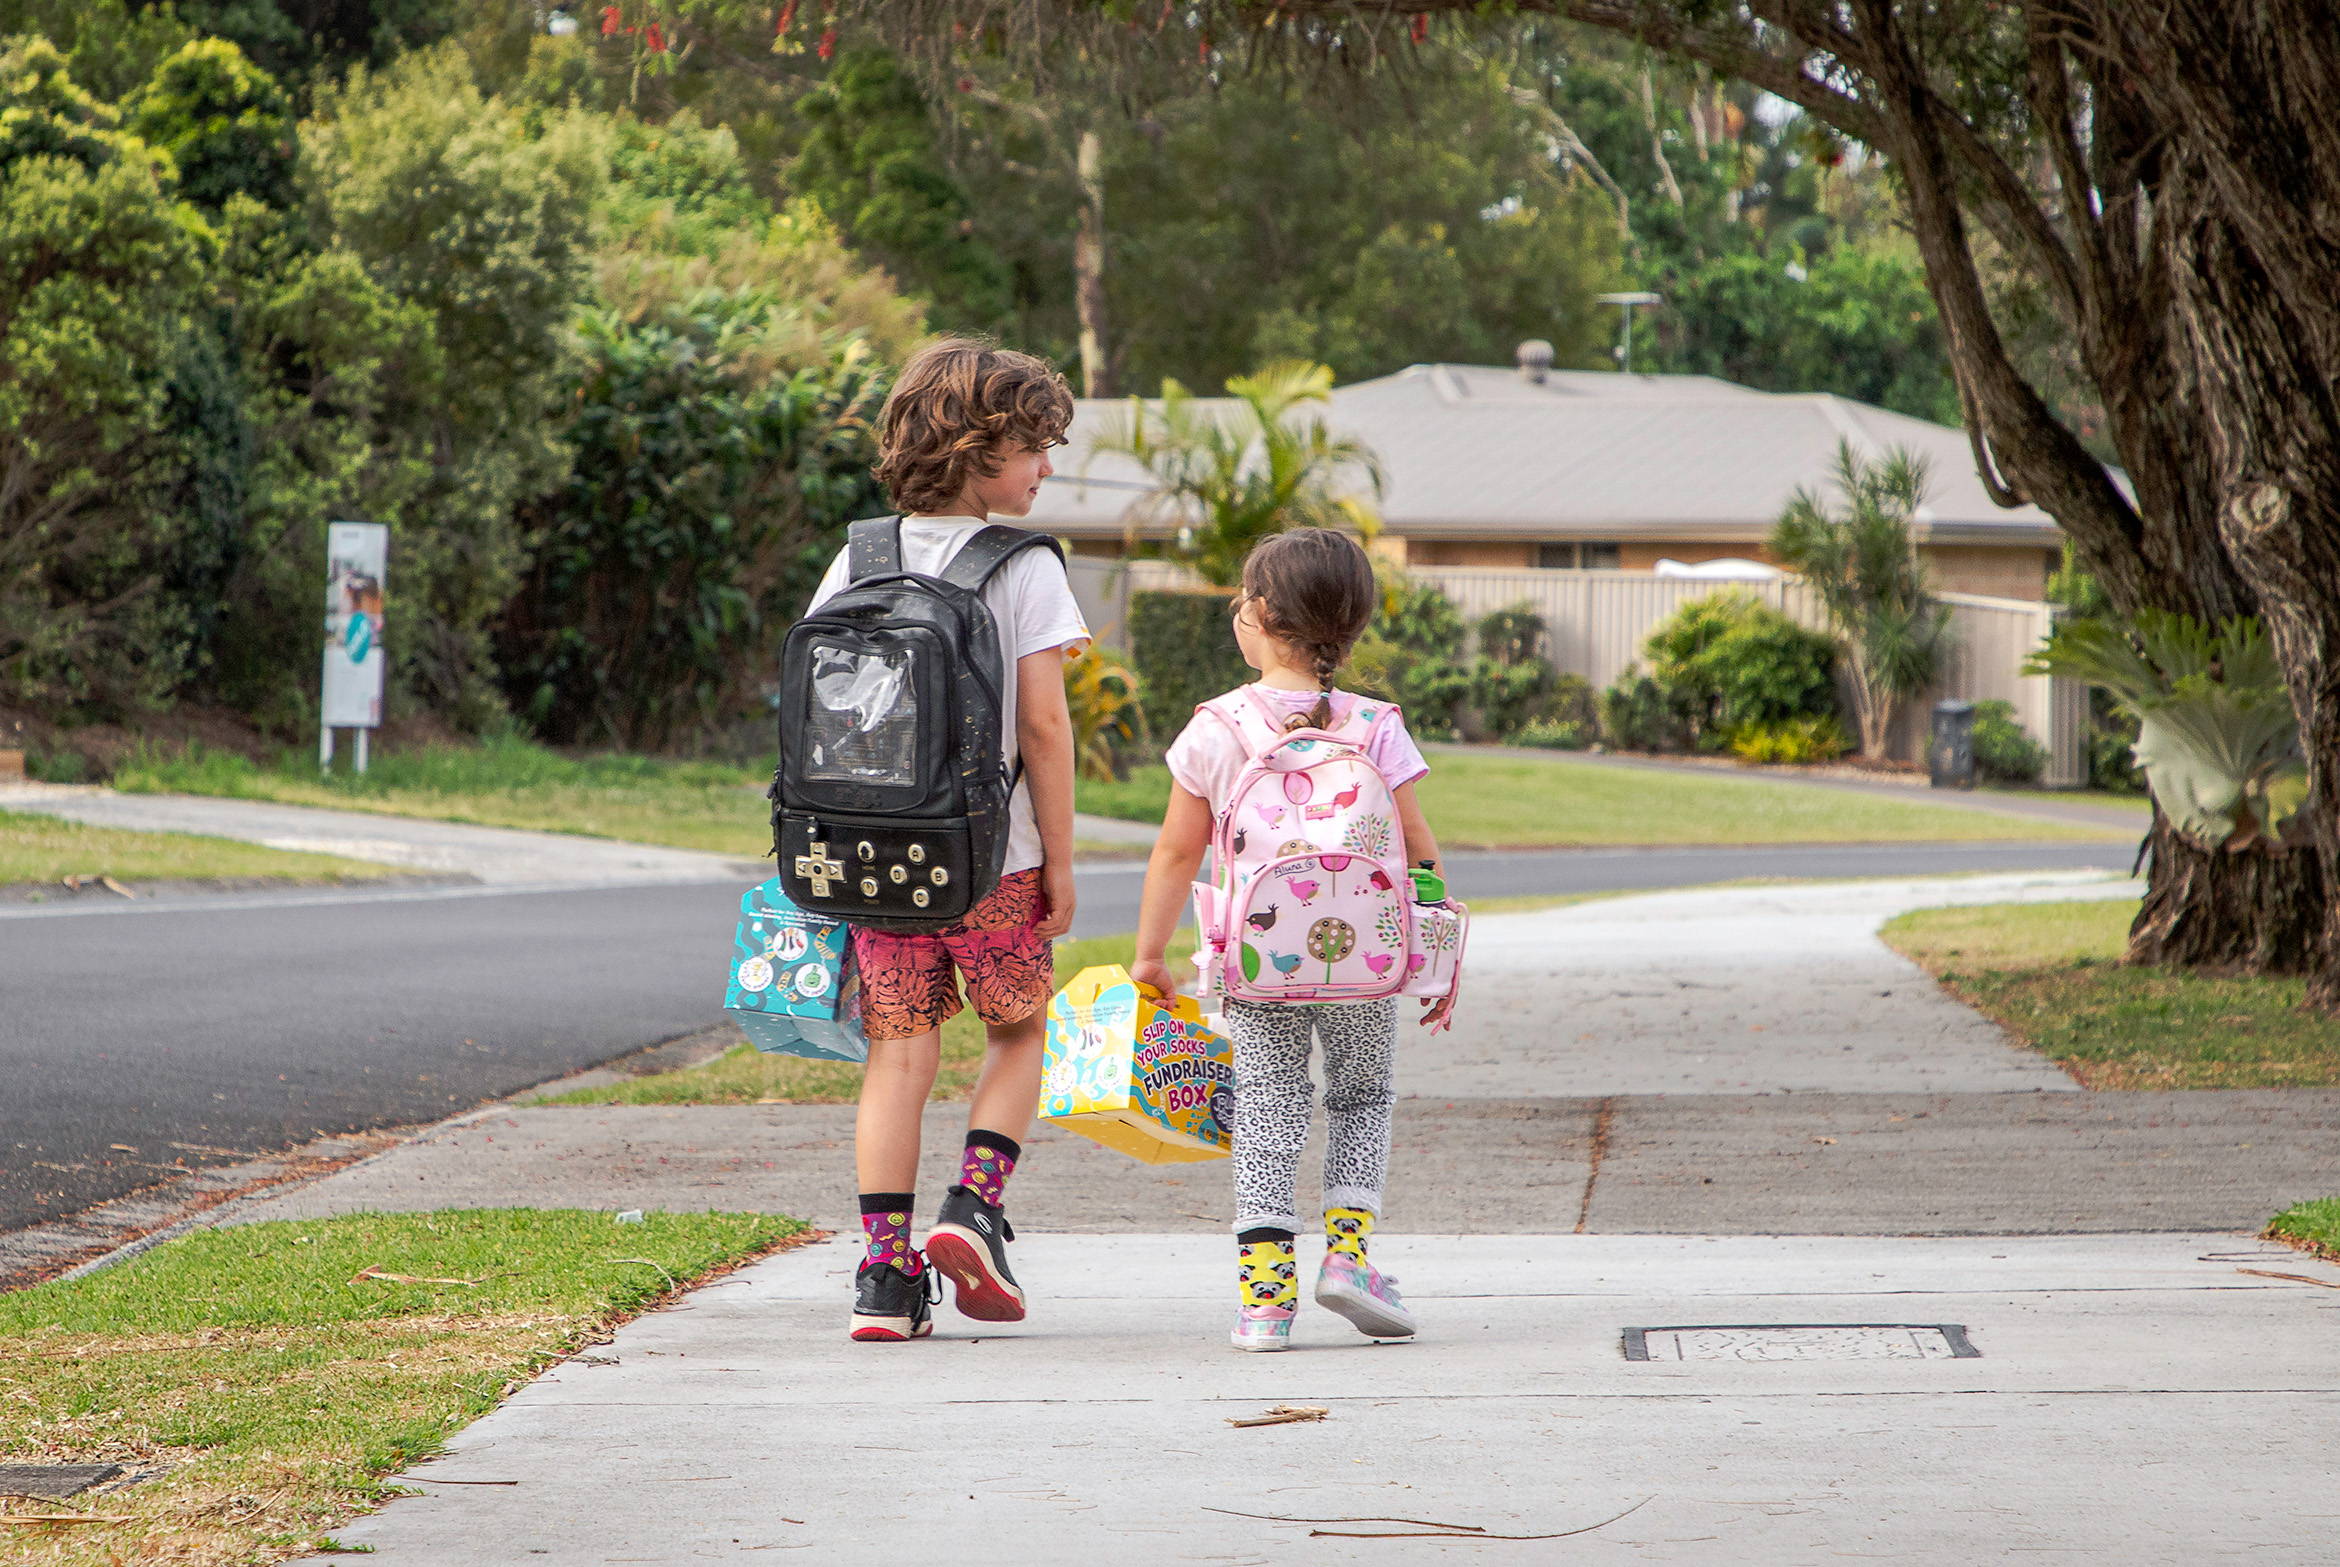 Kids walking with the fundraising boxes for School fundraising in Australia